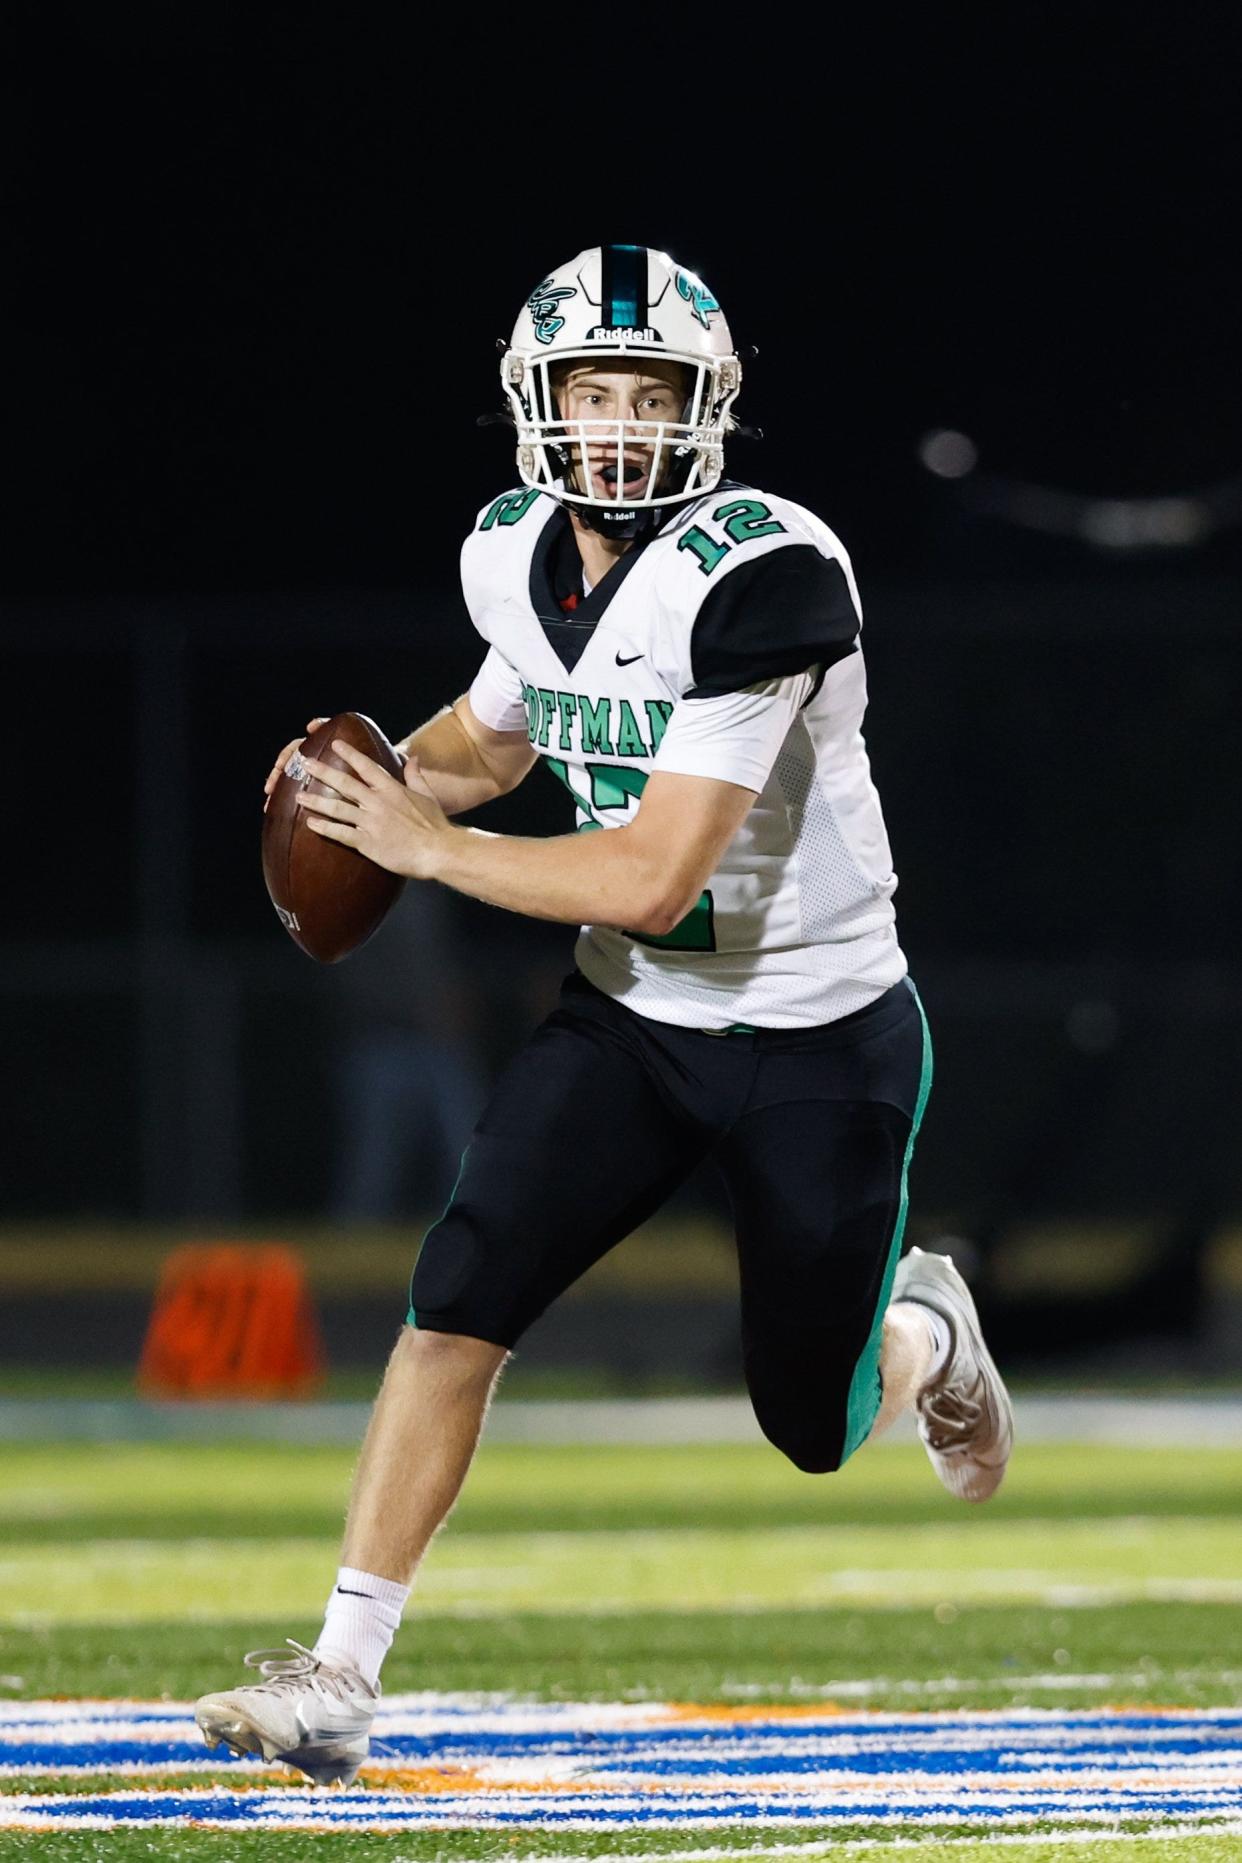 Quinn Hart and Dublin Coffman host Olentangy Liberty on Friday in a Division I, Region 2 quarterfinal.